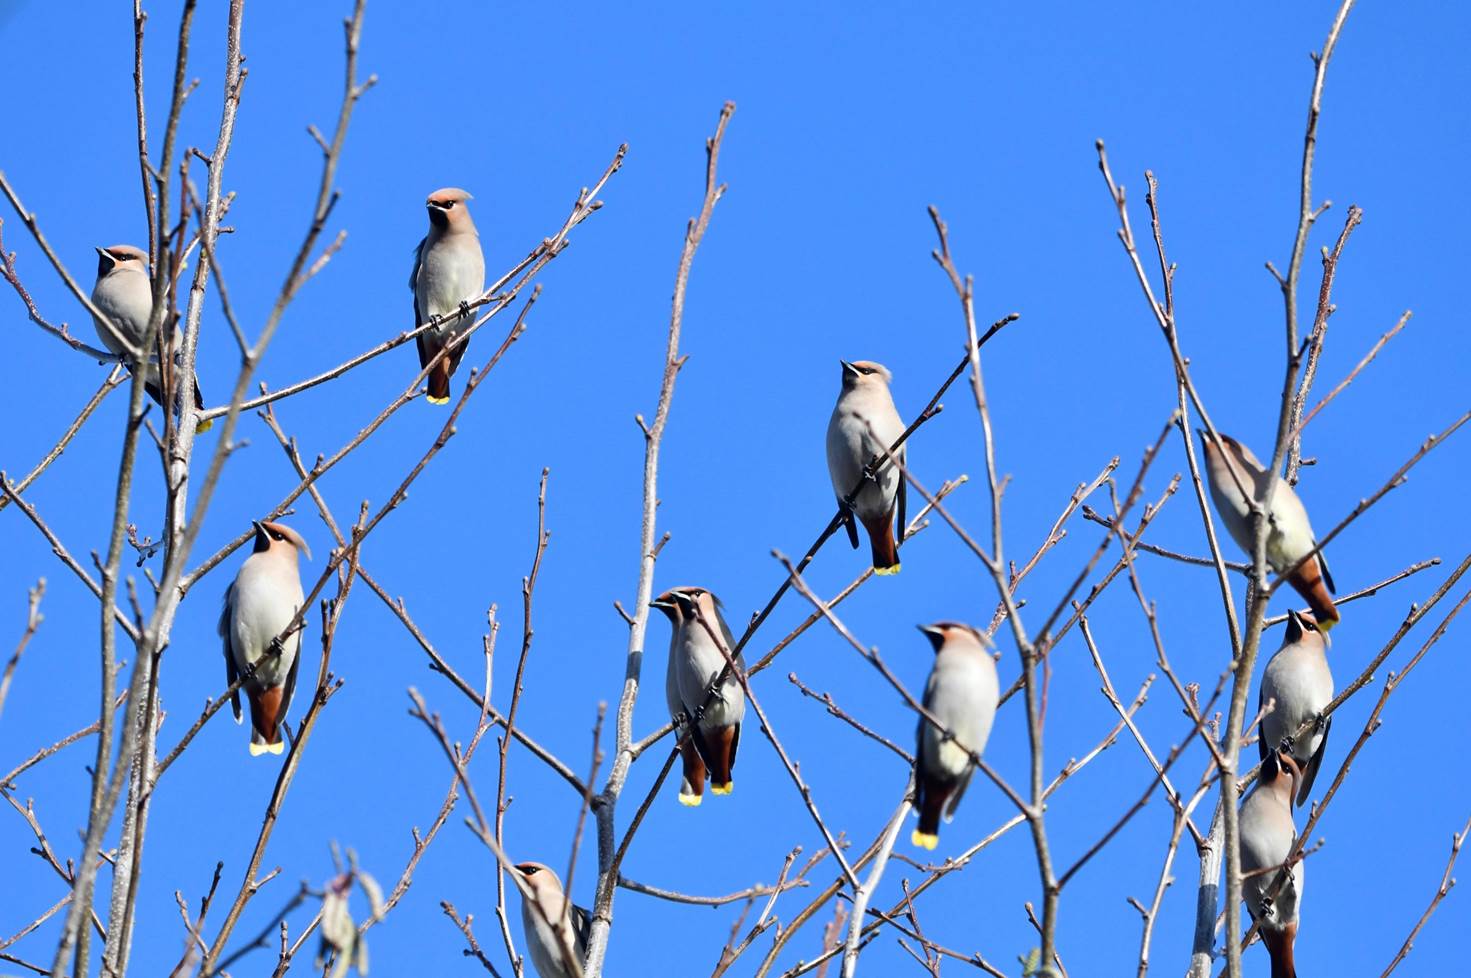 A group of birds sitting on branches

Description automatically generated